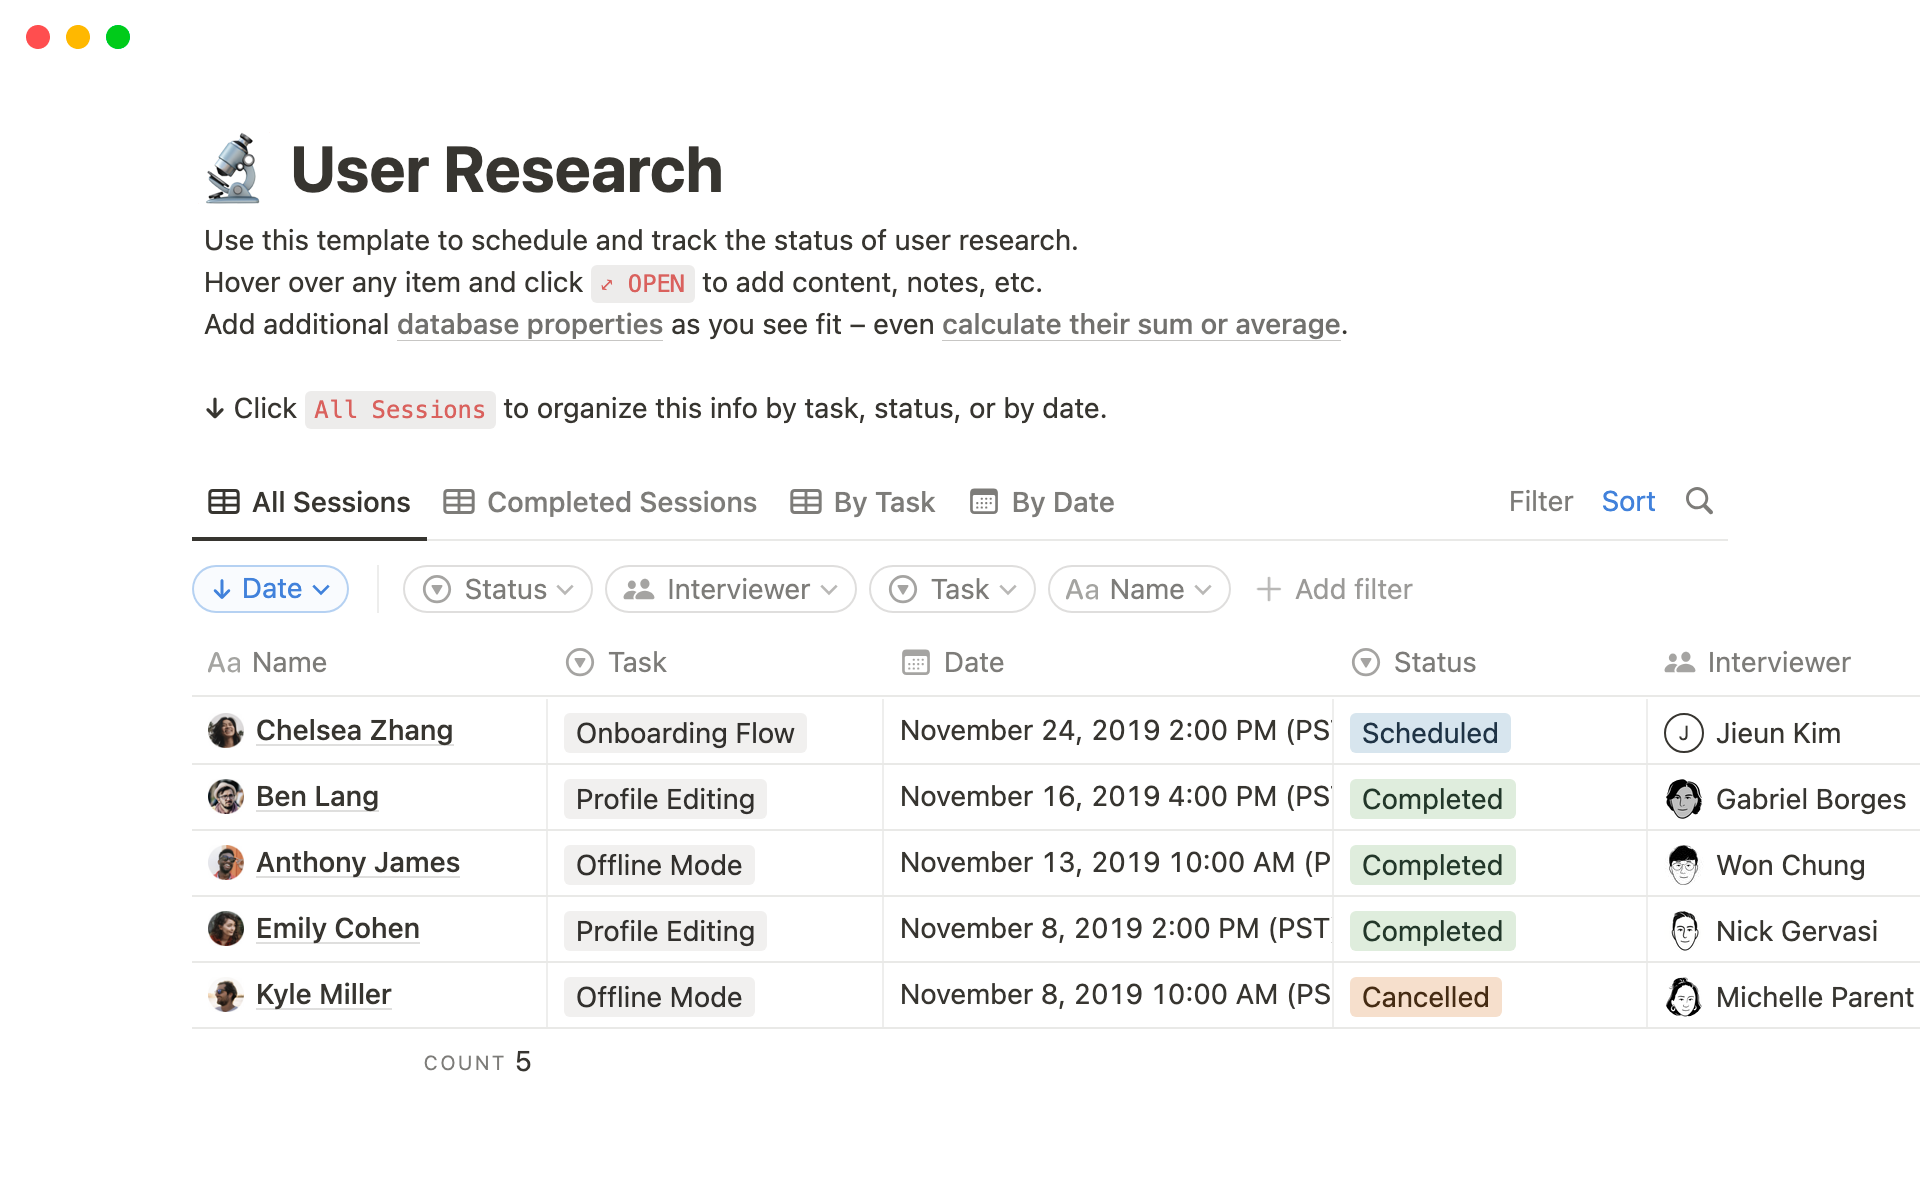 Use this template to schedule and track the status of your user research.